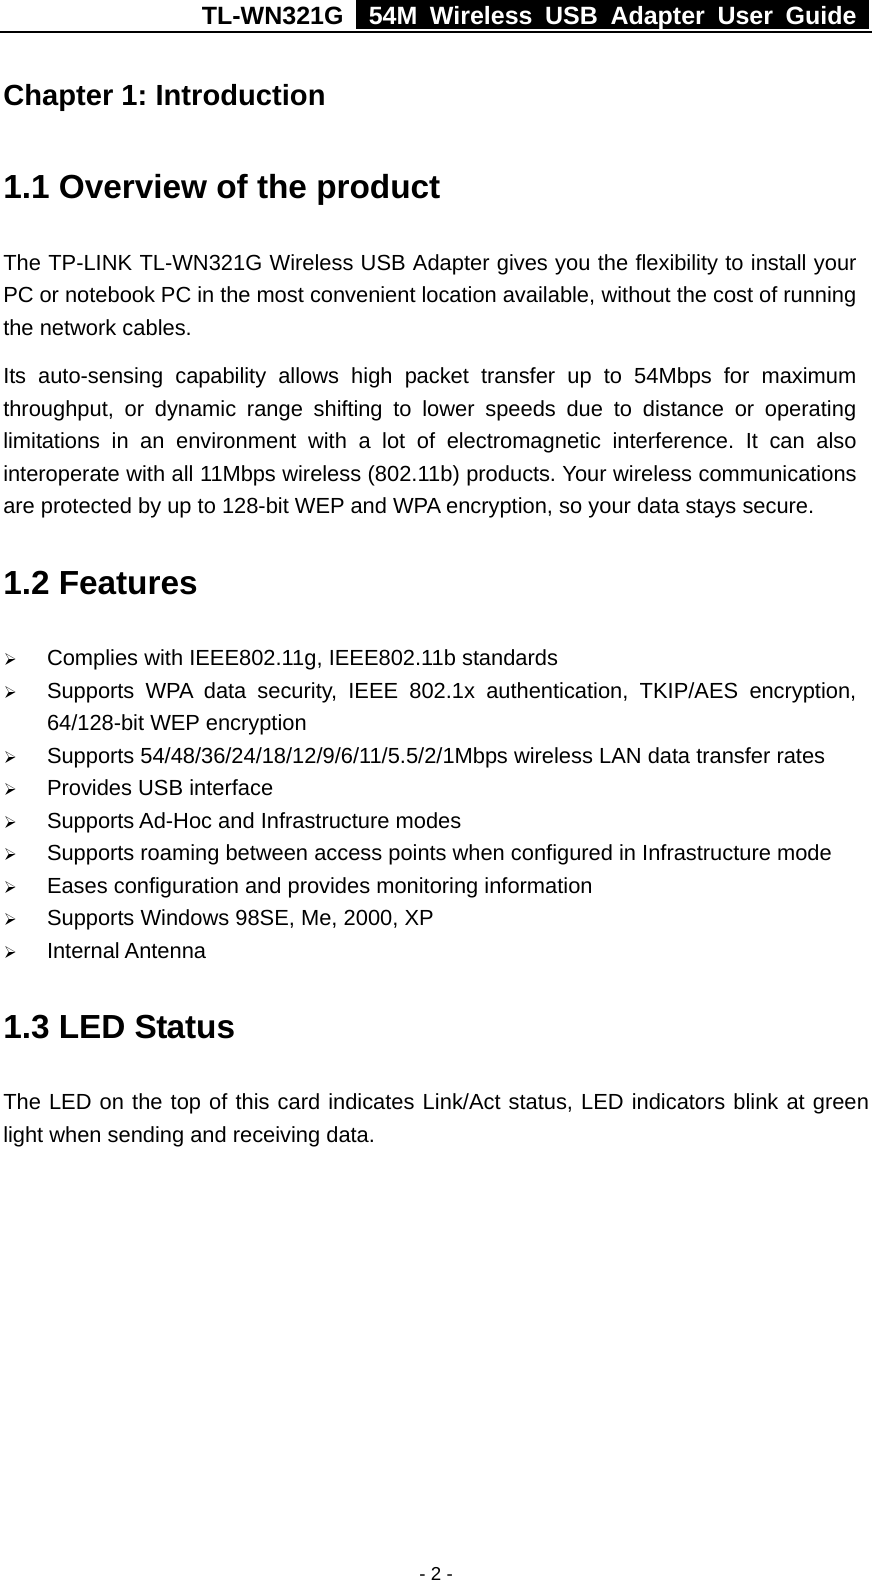 TL-WN321G   54M Wireless USB Adapter User Guide  Chapter 1: Introduction   1.1 Overview of the product The TP-LINK TL-WN321G Wireless USB Adapter gives you the flexibility to install your PC or notebook PC in the most convenient location available, without the cost of running the network cables. Its auto-sensing capability allows high packet transfer up to 54Mbps for maximum throughput, or dynamic range shifting to lower speeds due to distance or operating limitations in an environment with a lot of electromagnetic interference. It can also interoperate with all 11Mbps wireless (802.11b) products. Your wireless communications are protected by up to 128-bit WEP and WPA encryption, so your data stays secure. 1.2 Features   Complies with IEEE802.11g, IEEE802.11b standards   Supports WPA data security, IEEE 802.1x authentication, TKIP/AES encryption, 64/128-bit WEP encryption   Supports 54/48/36/24/18/12/9/6/11/5.5/2/1Mbps wireless LAN data transfer rates   Provides USB interface   Supports Ad-Hoc and Infrastructure modes    Supports roaming between access points when configured in Infrastructure mode   Eases configuration and provides monitoring information   Supports Windows 98SE, Me, 2000, XP   Internal Antenna 1.3 LED Status The LED on the top of this card indicates Link/Act status, LED indicators blink at green light when sending and receiving data. - 2 -